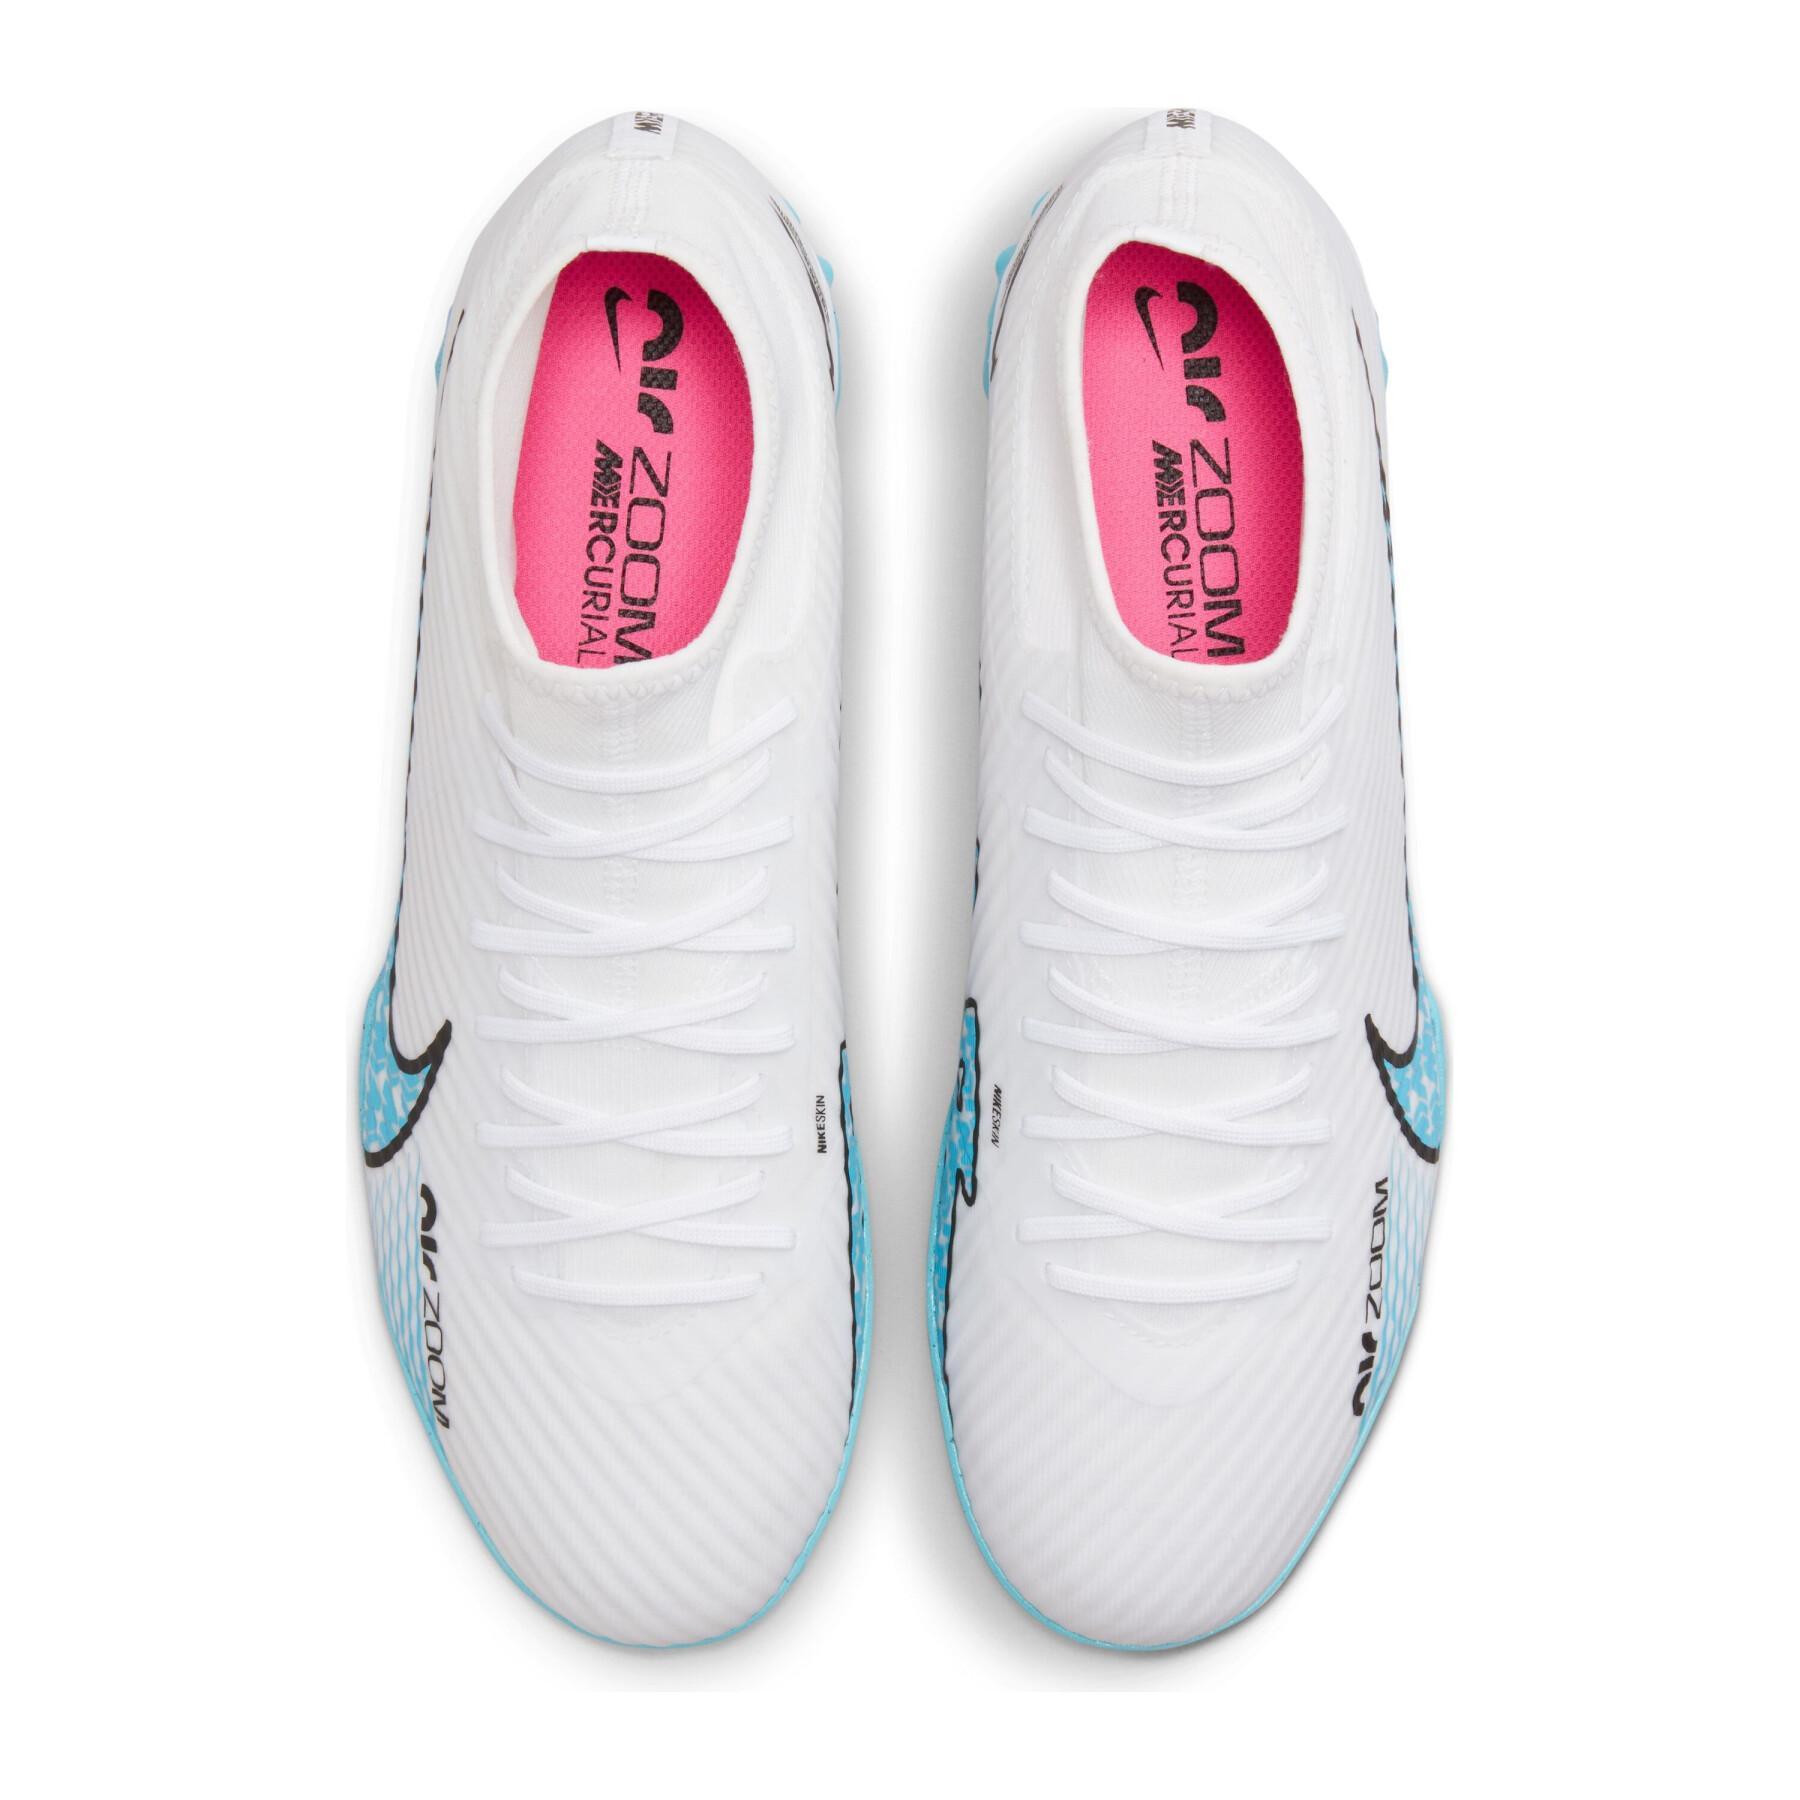 Chaussures de football Nike Zoom Mercurial Superfly 9 Academy TF